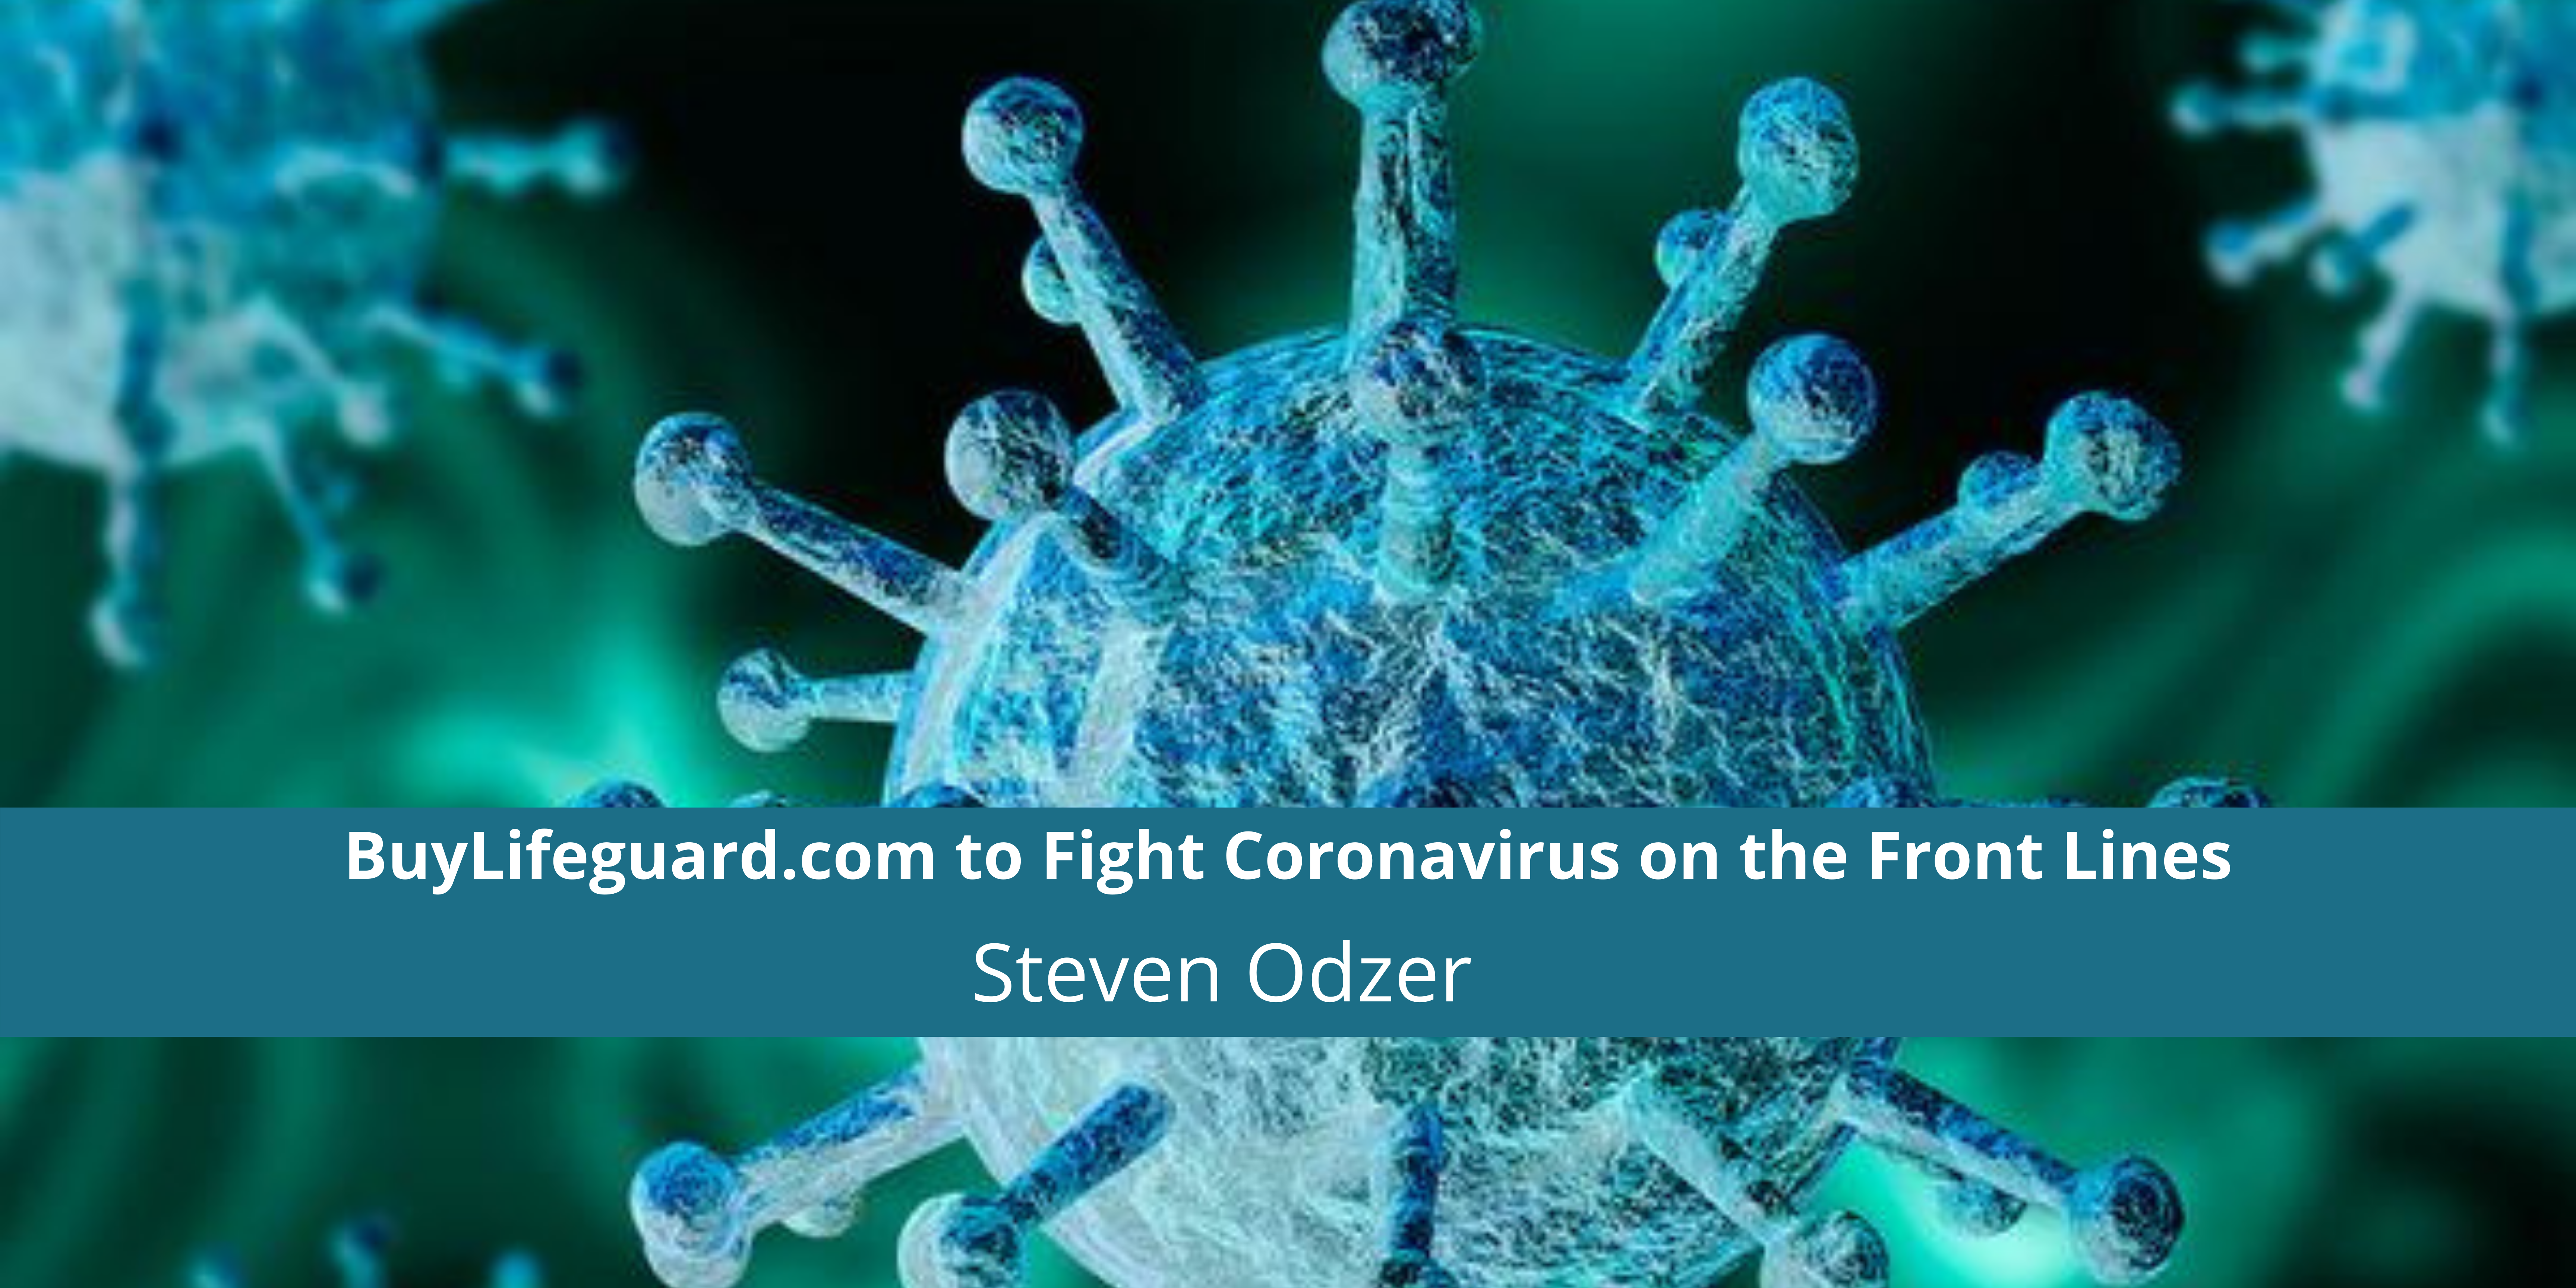 BuyLifeguard.com to Fight Coronavirus on the Front Lines